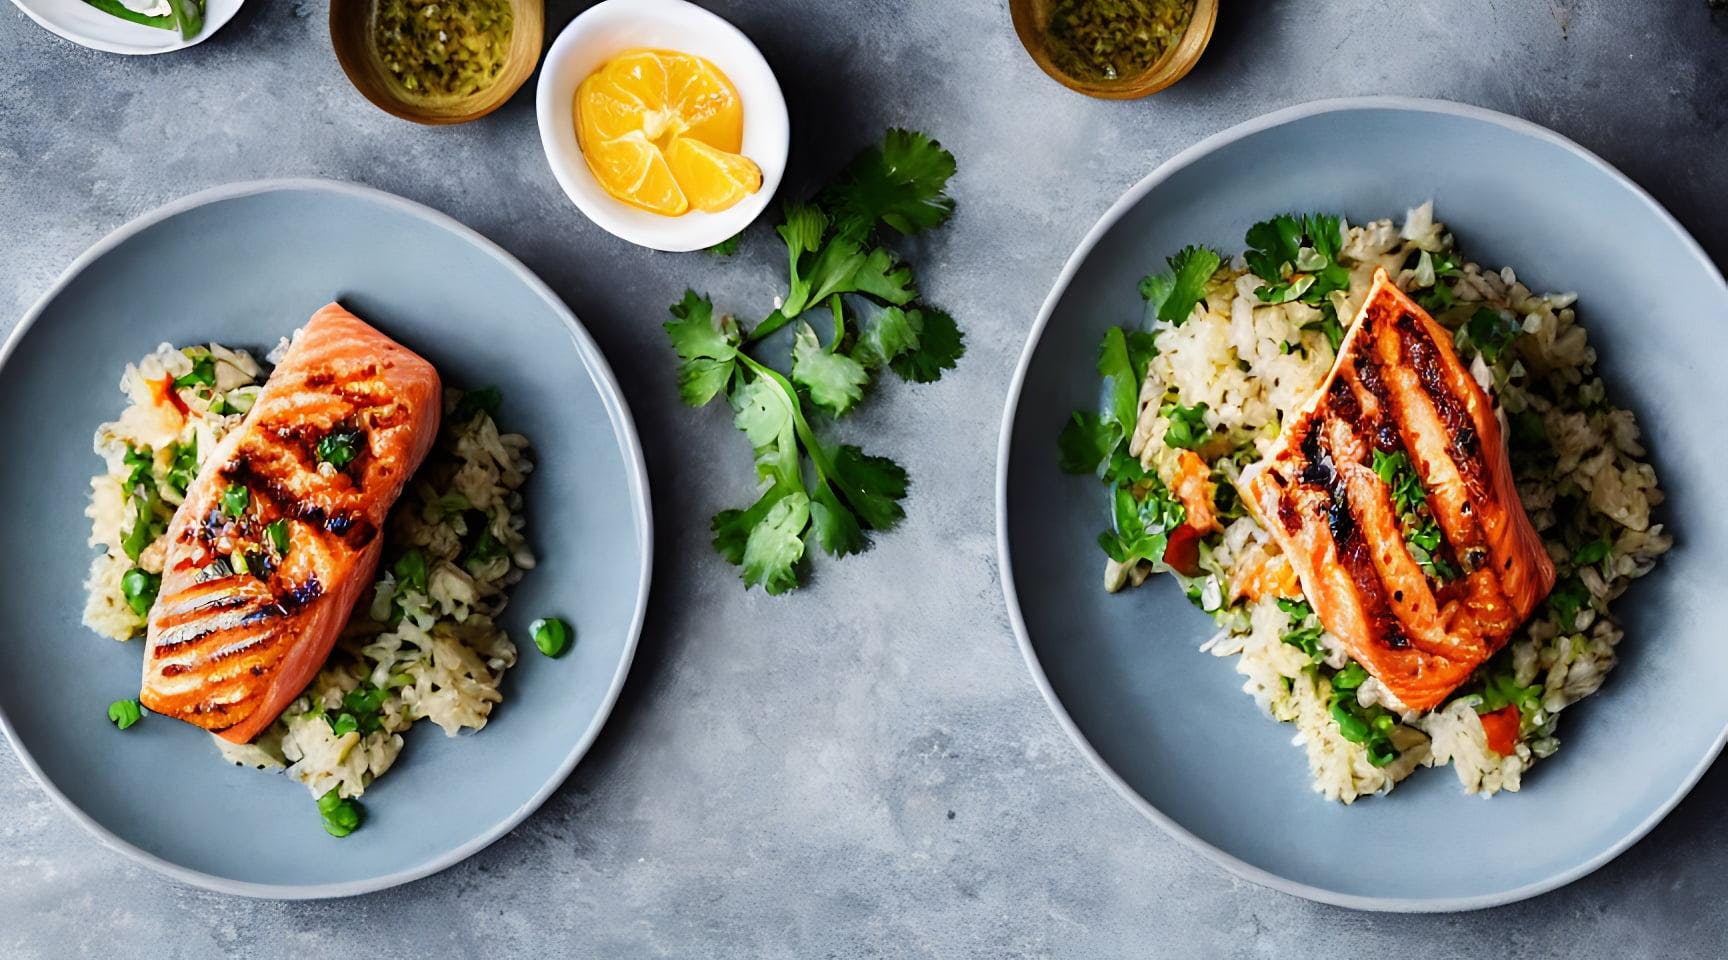 Photo Of Grilled Salmon Filet On Fried Rice With Coriander